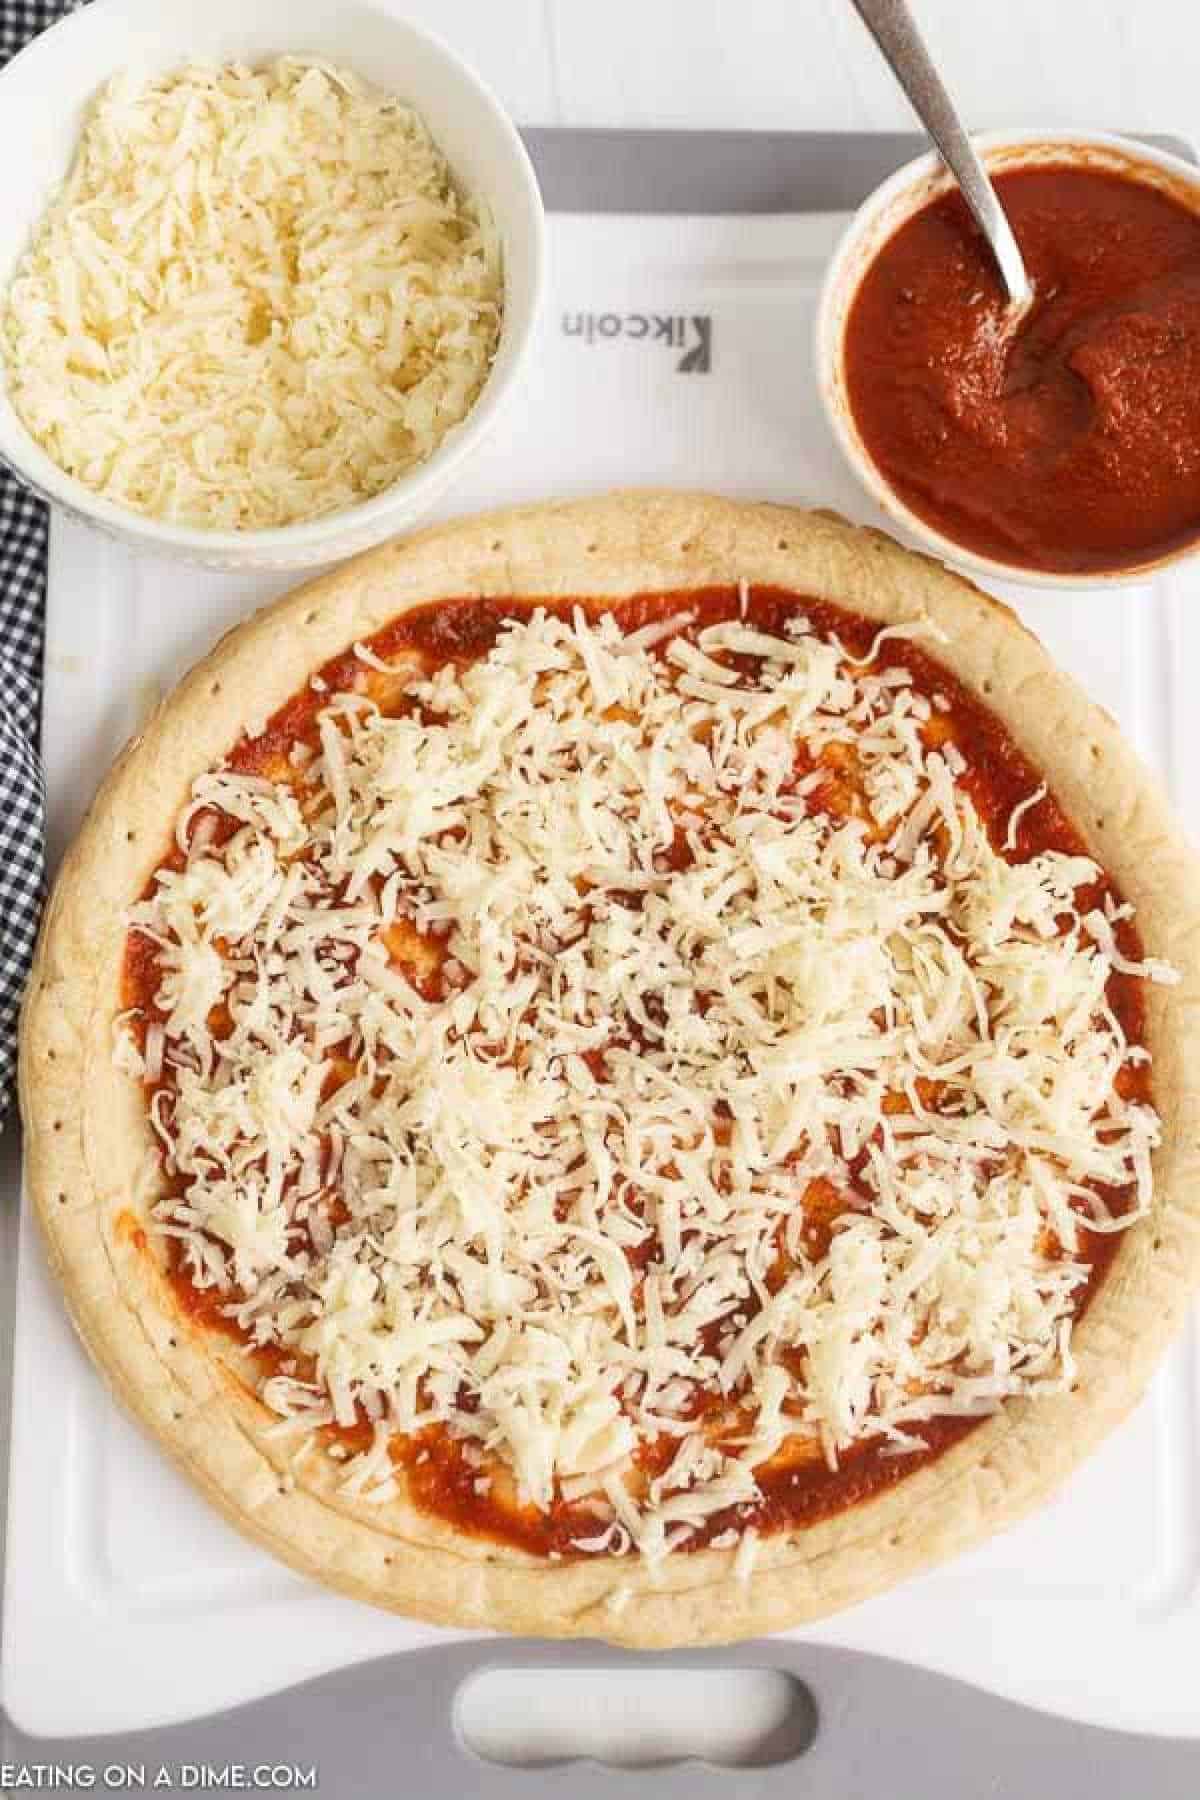 Topping pizza crust and sauce with shredded cheese